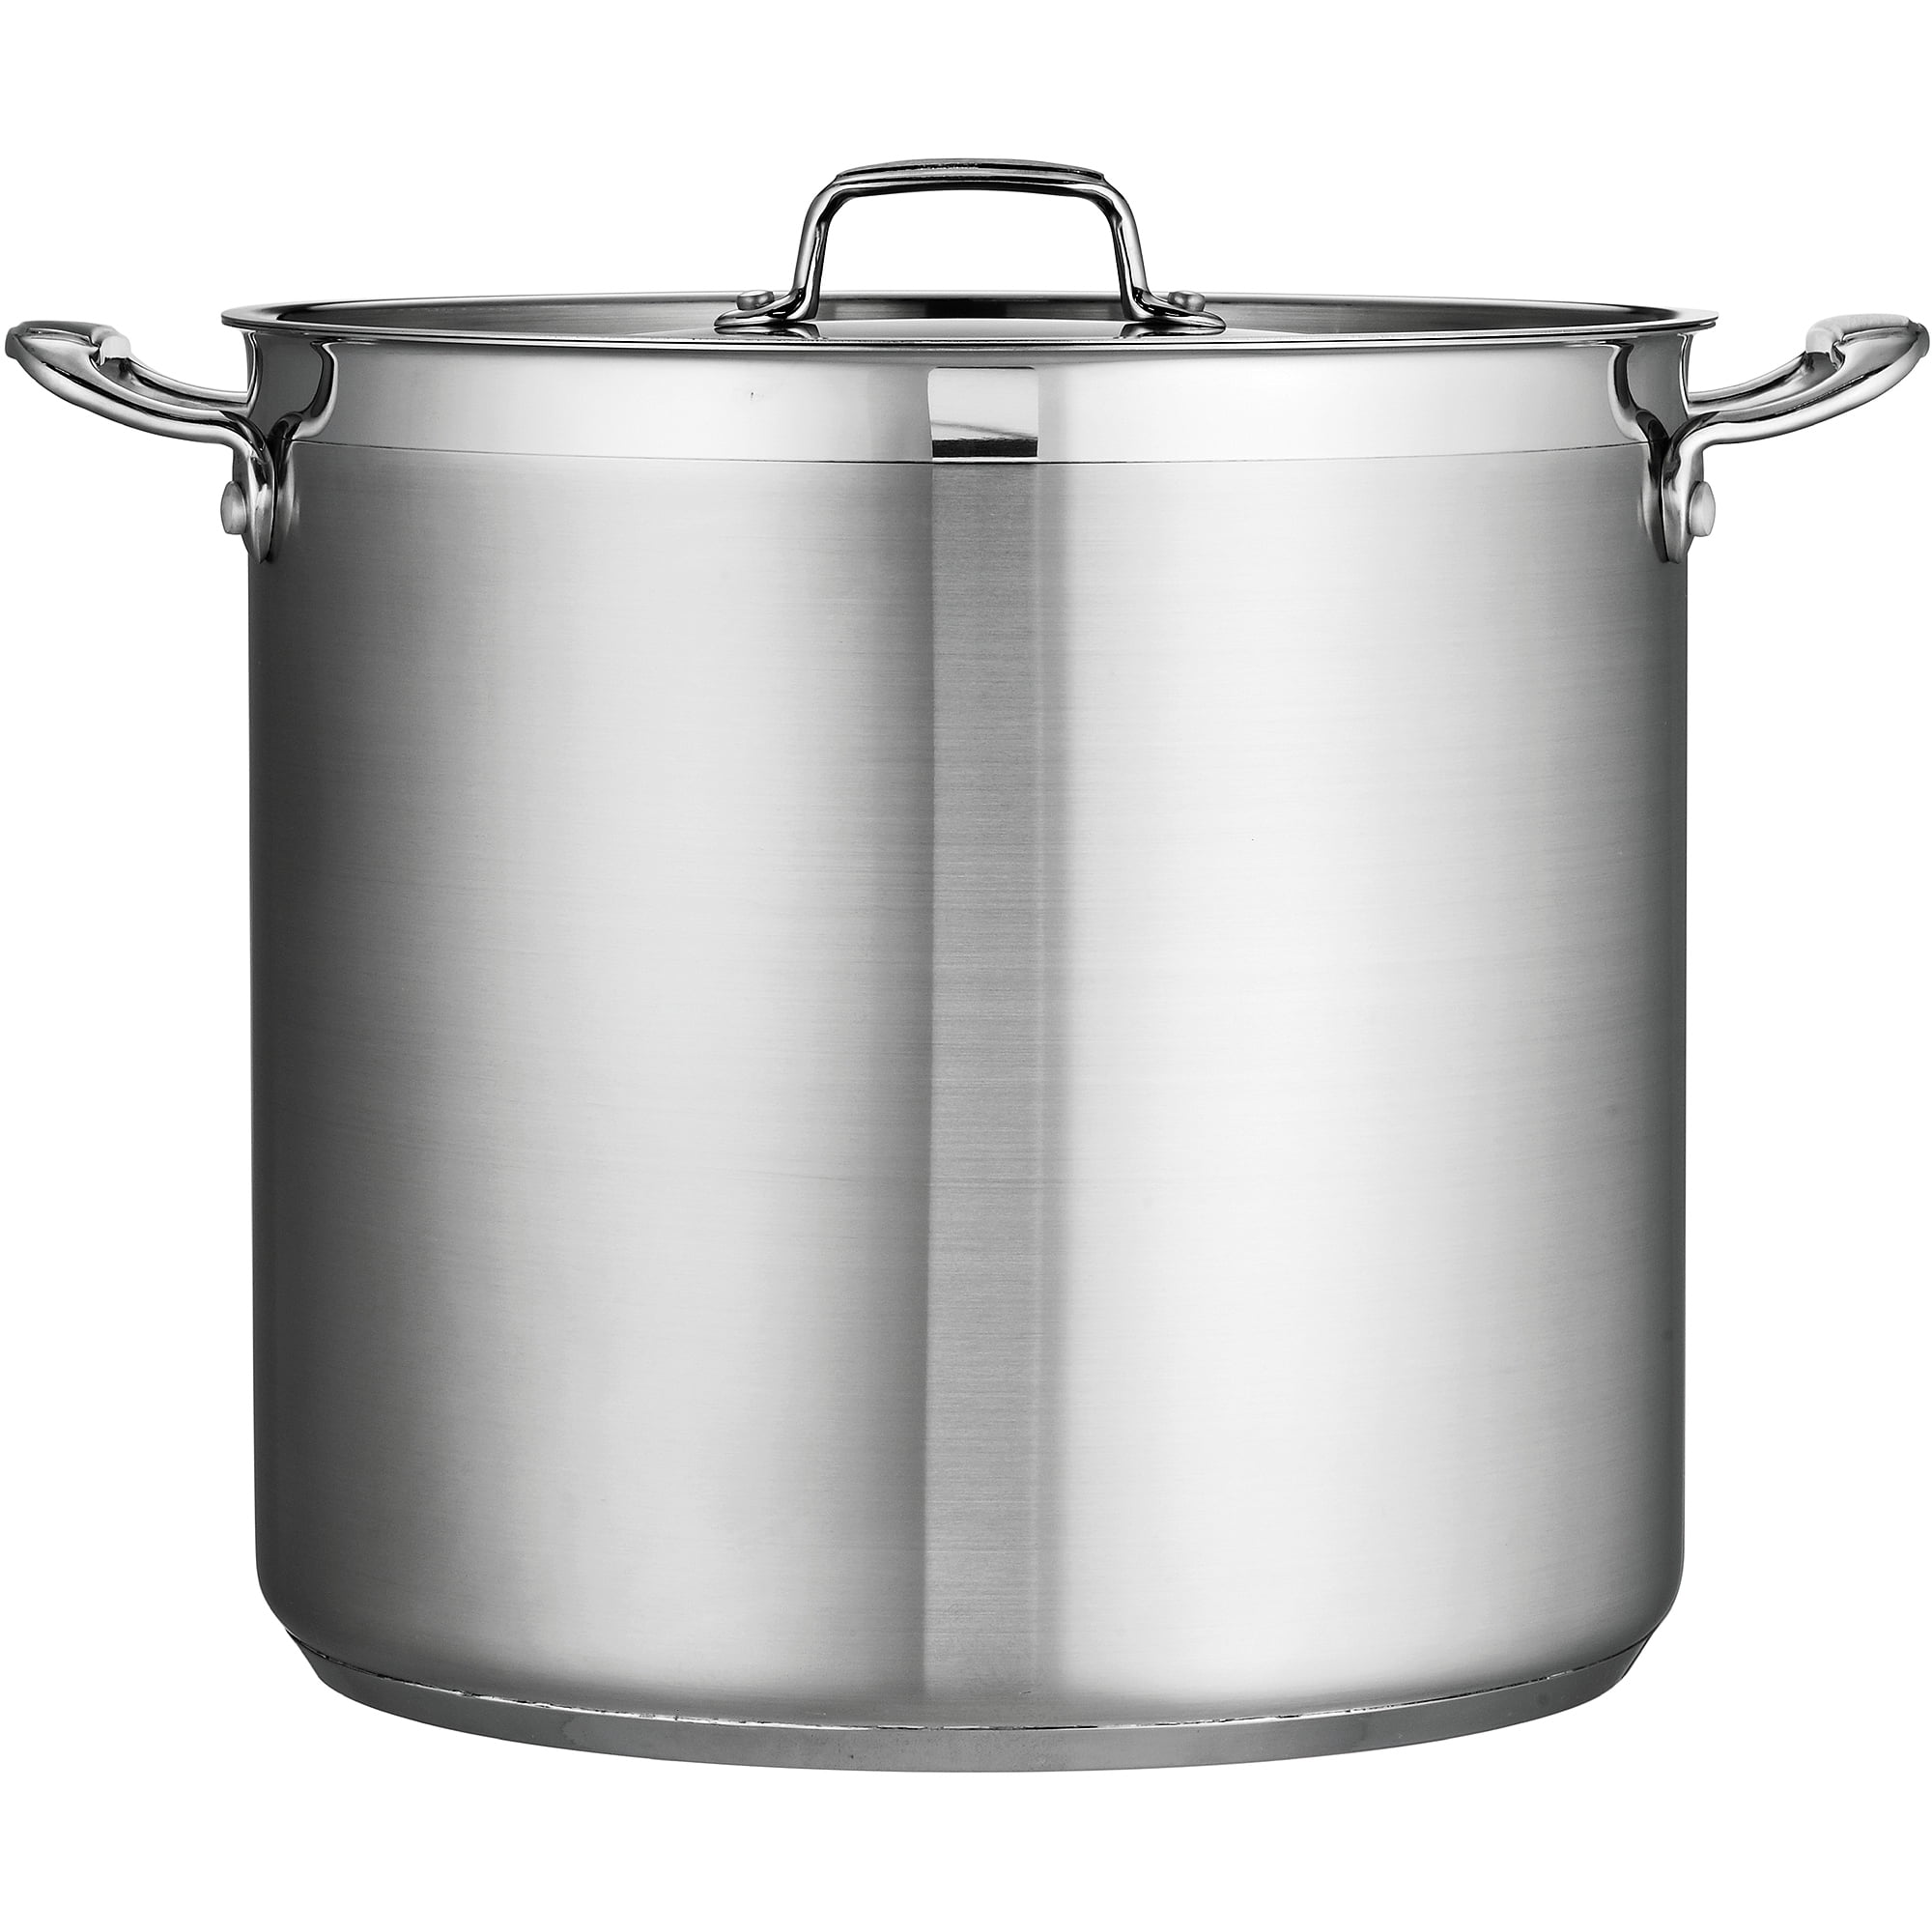 22 QT Tramontina Stainless Steel Covered Stockpot Induction Ready 3ply Base Clear Lid for sale online 